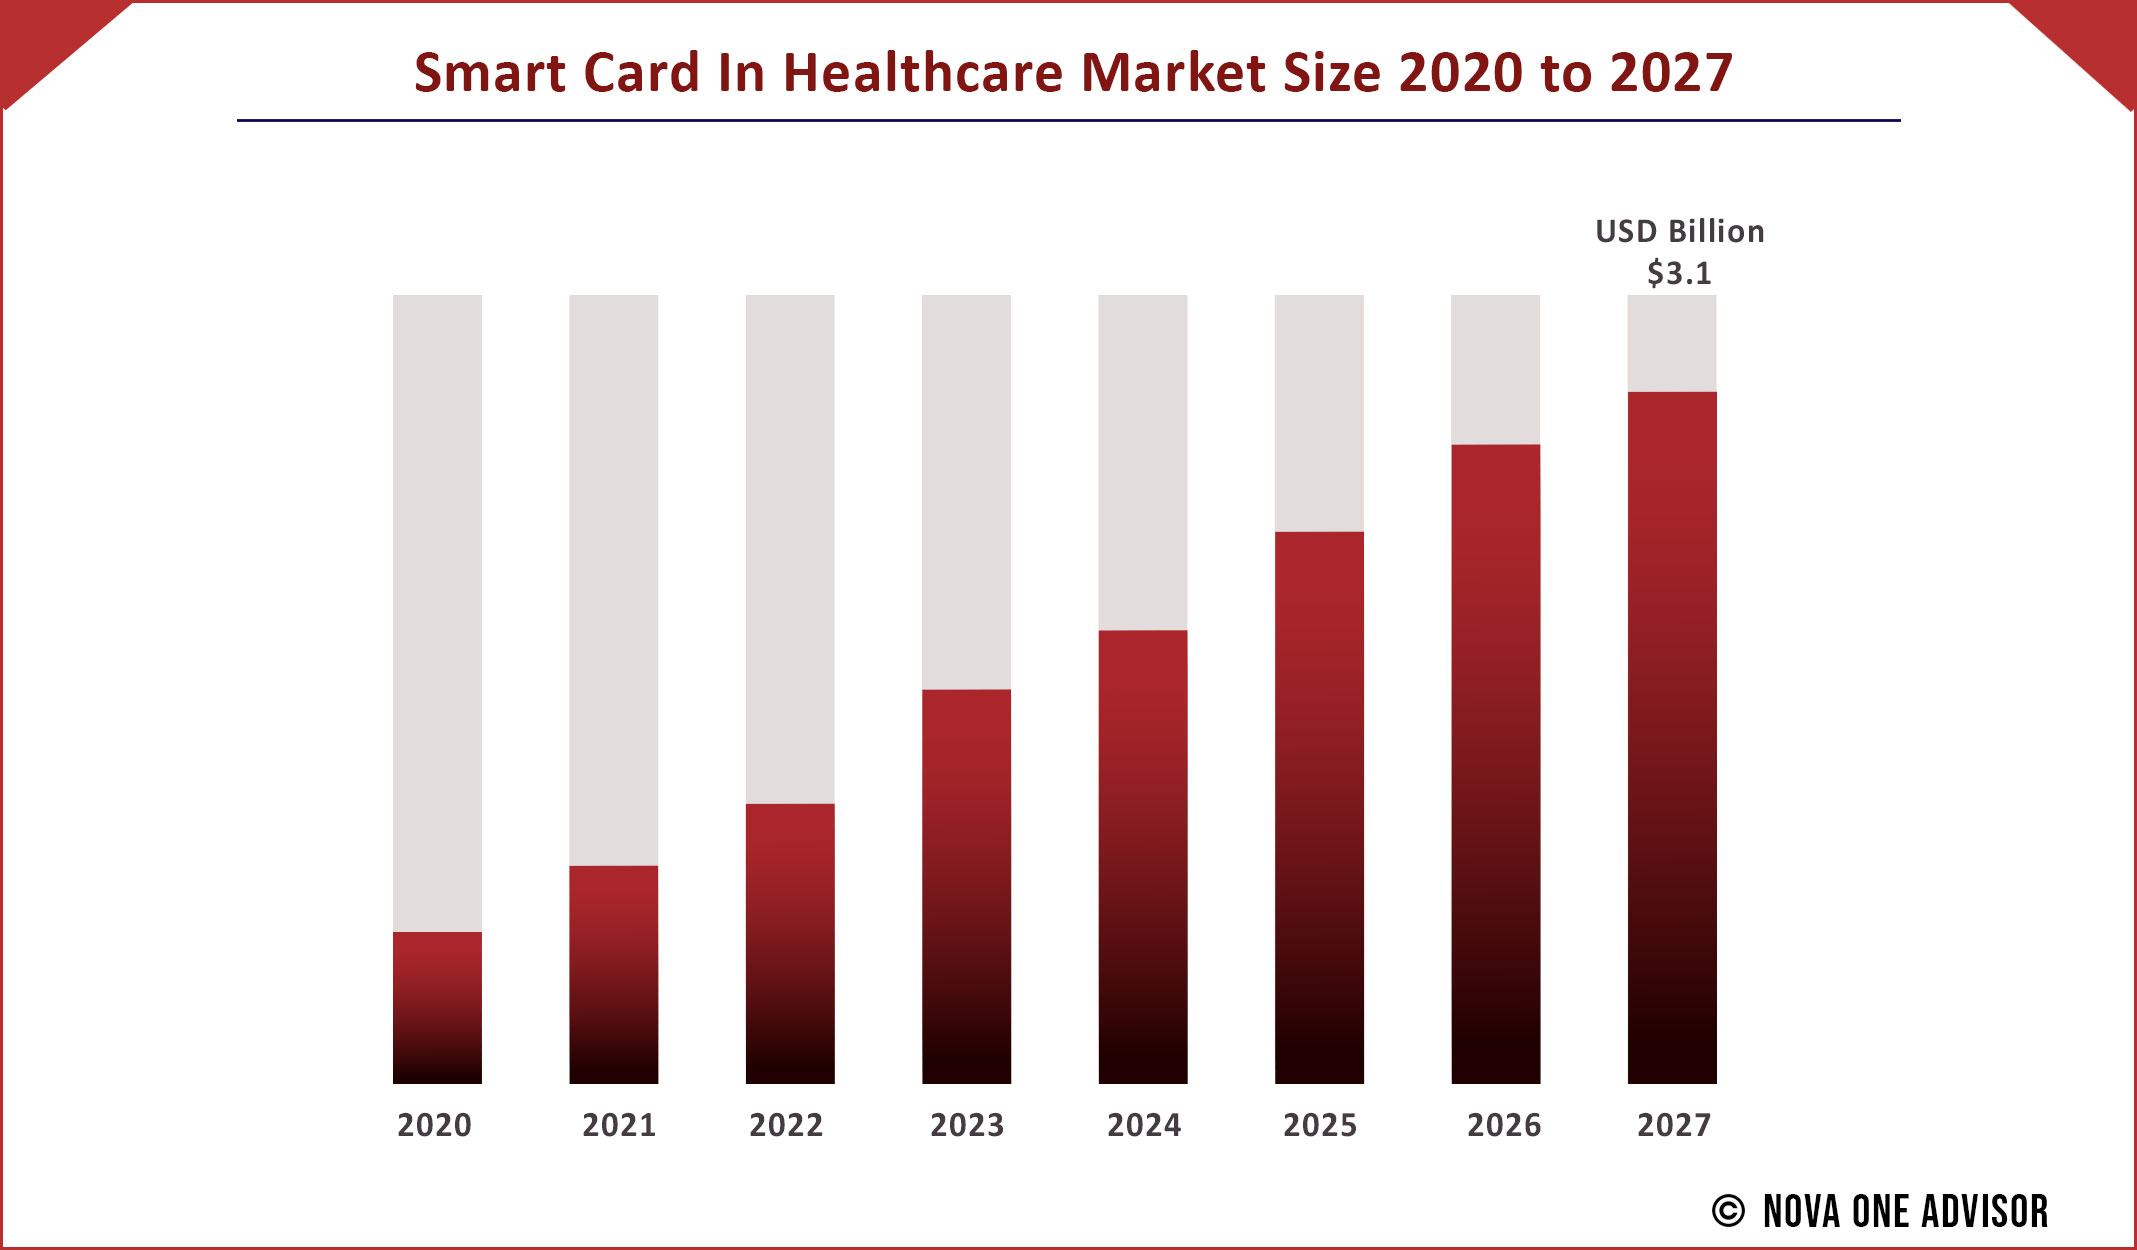 Smart Card In Healthcare Market Size 2020 to 2027